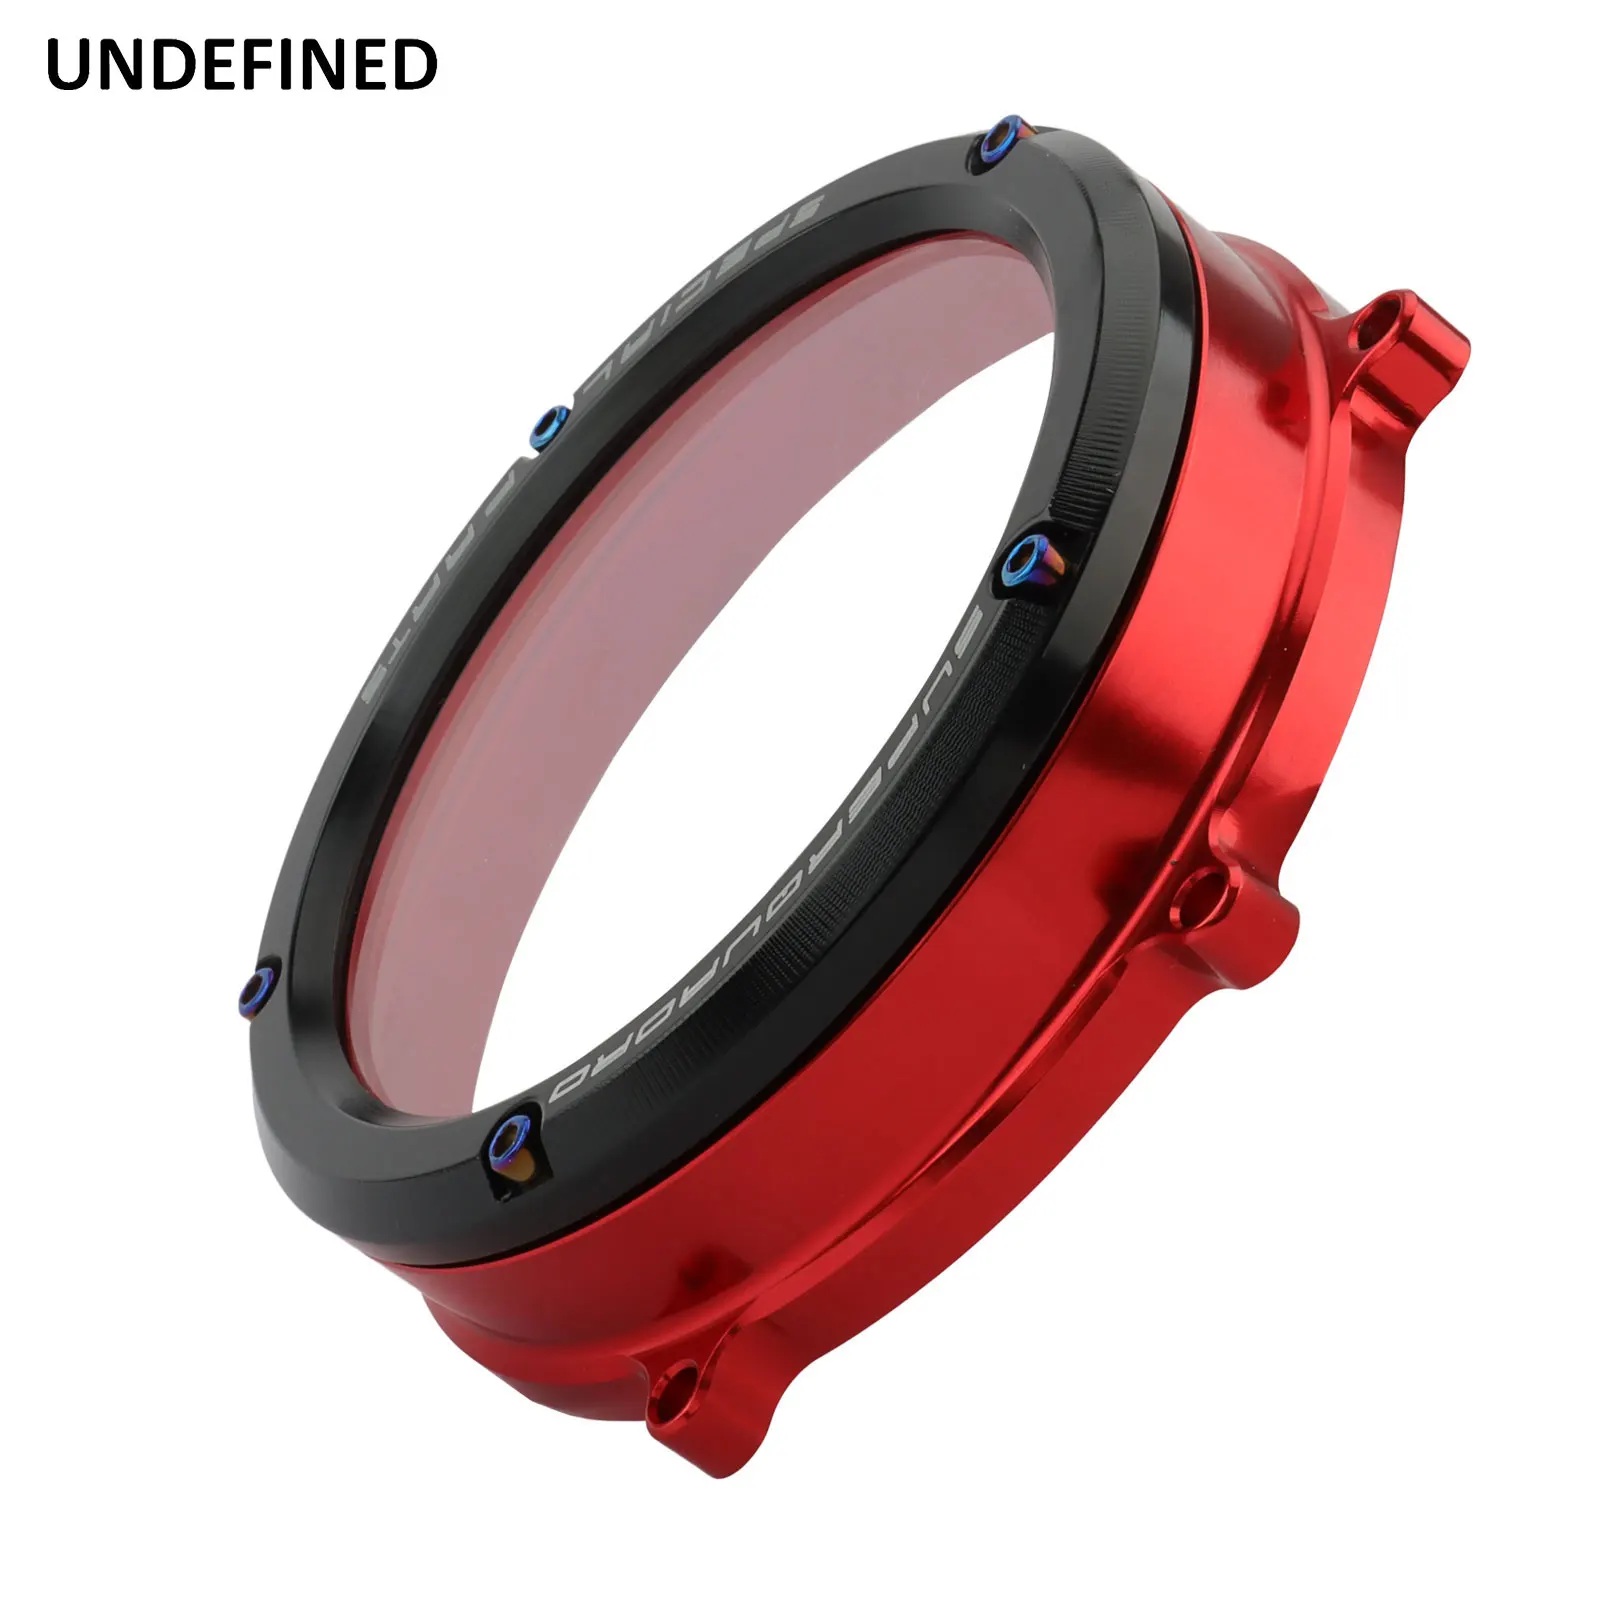 Motorcycle Clear Clutch Engine Cover Protector Guard Red Black For Ducati 1199 Panigale ABS 959 1299 V2 Tricolore Final Edition enlarge